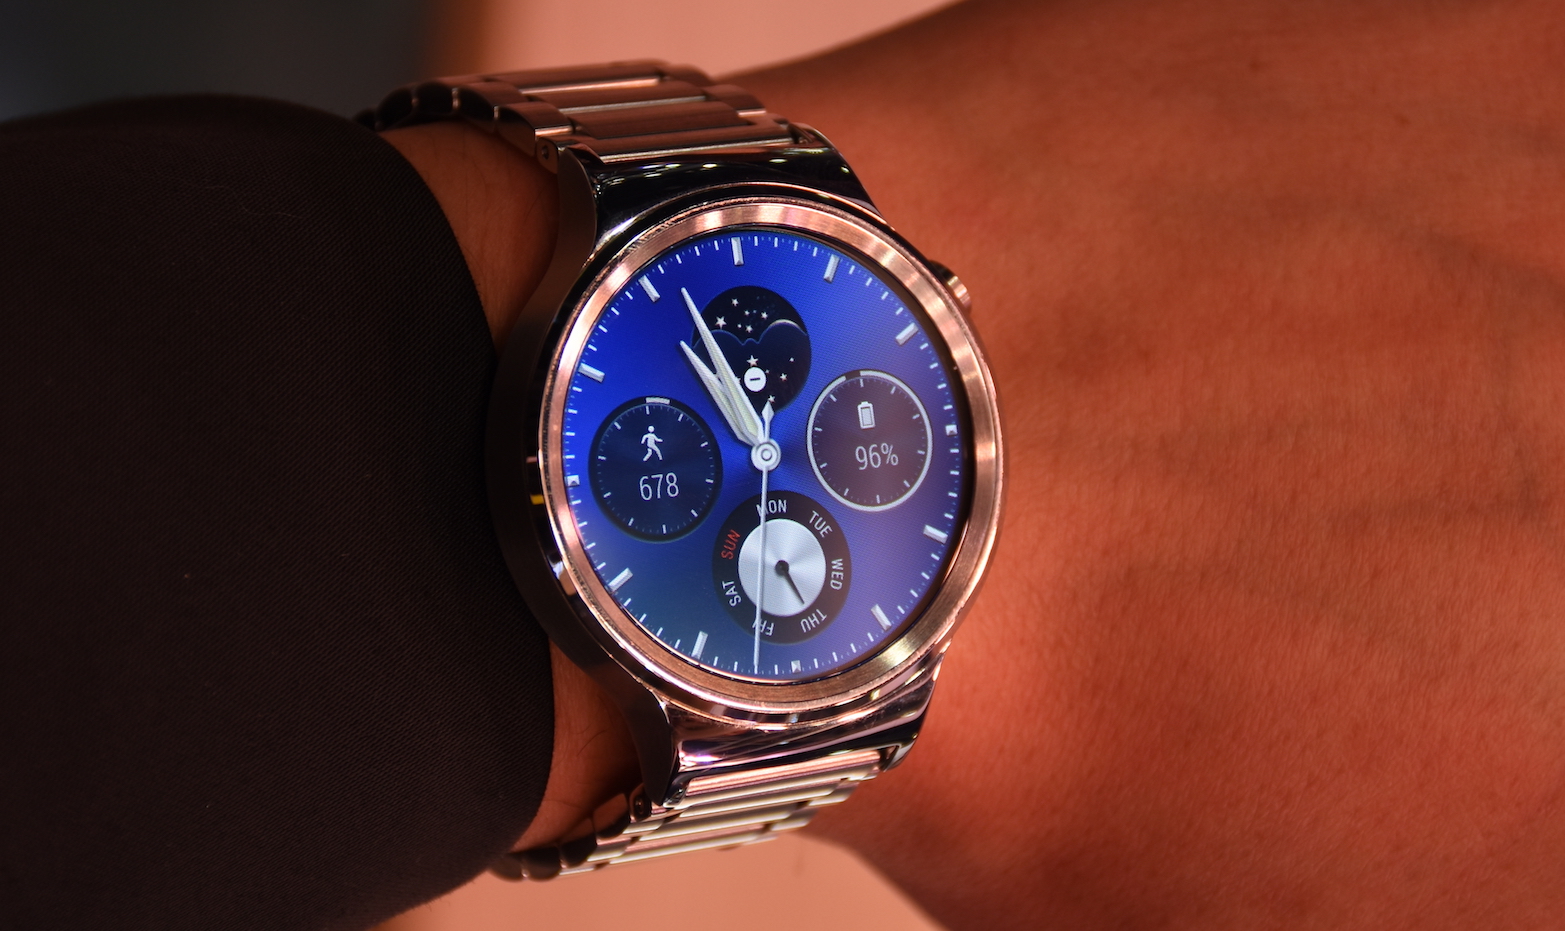 Android Wear 2.0 is now rolling out to the Huawei watch beta users 2